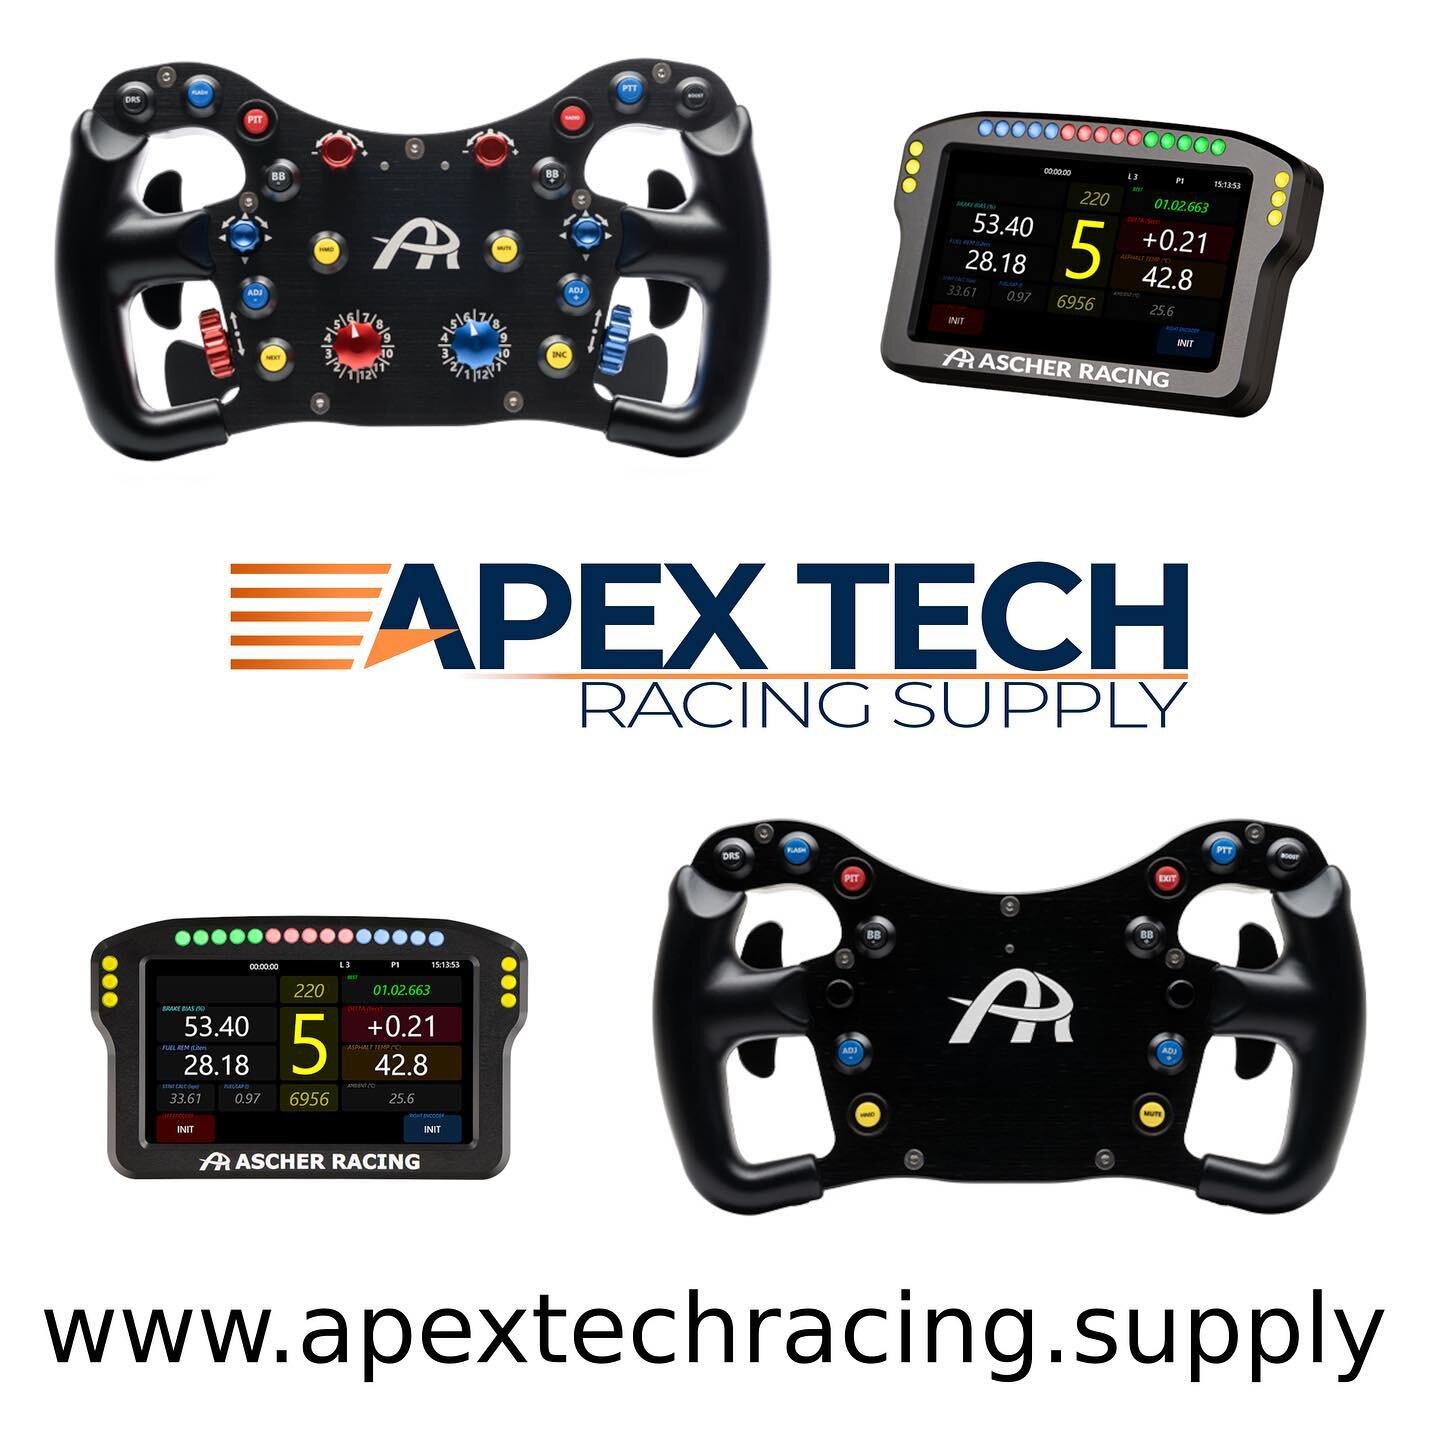 @ascher.racing wheels and DDUs are selling fast to our 🇺🇸 customers! Get yours before they&rsquo;re gone. 

We have the following items left:
Two F64-USB V3 Wheels
Two F28-SC V2 Simucube Wireless Wheels
Two 5&rdquo; Dashboard Displays
Two 4&rdquo; 